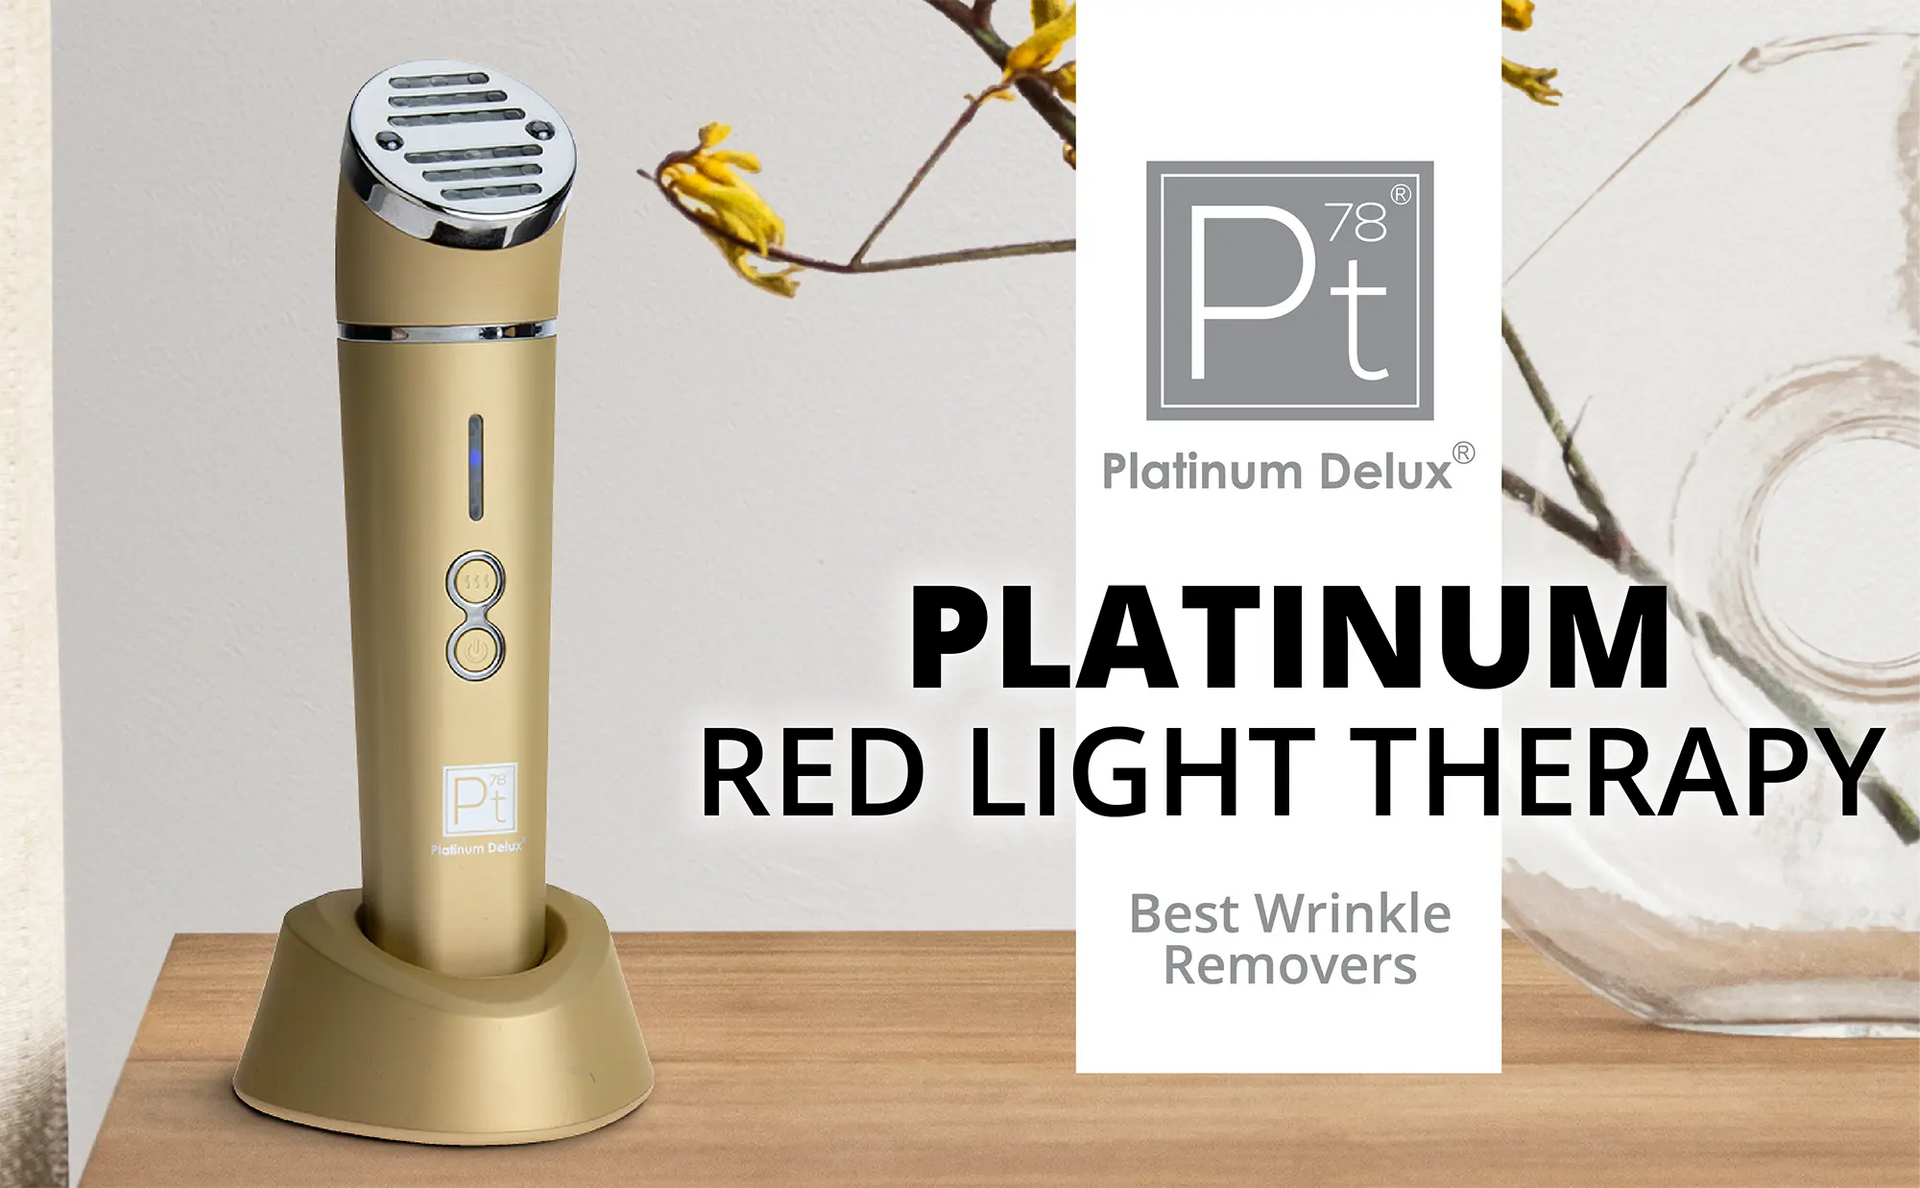 Use Infrared LED Facial Rejuvenation Device to get a younger look Platinum Delux ®